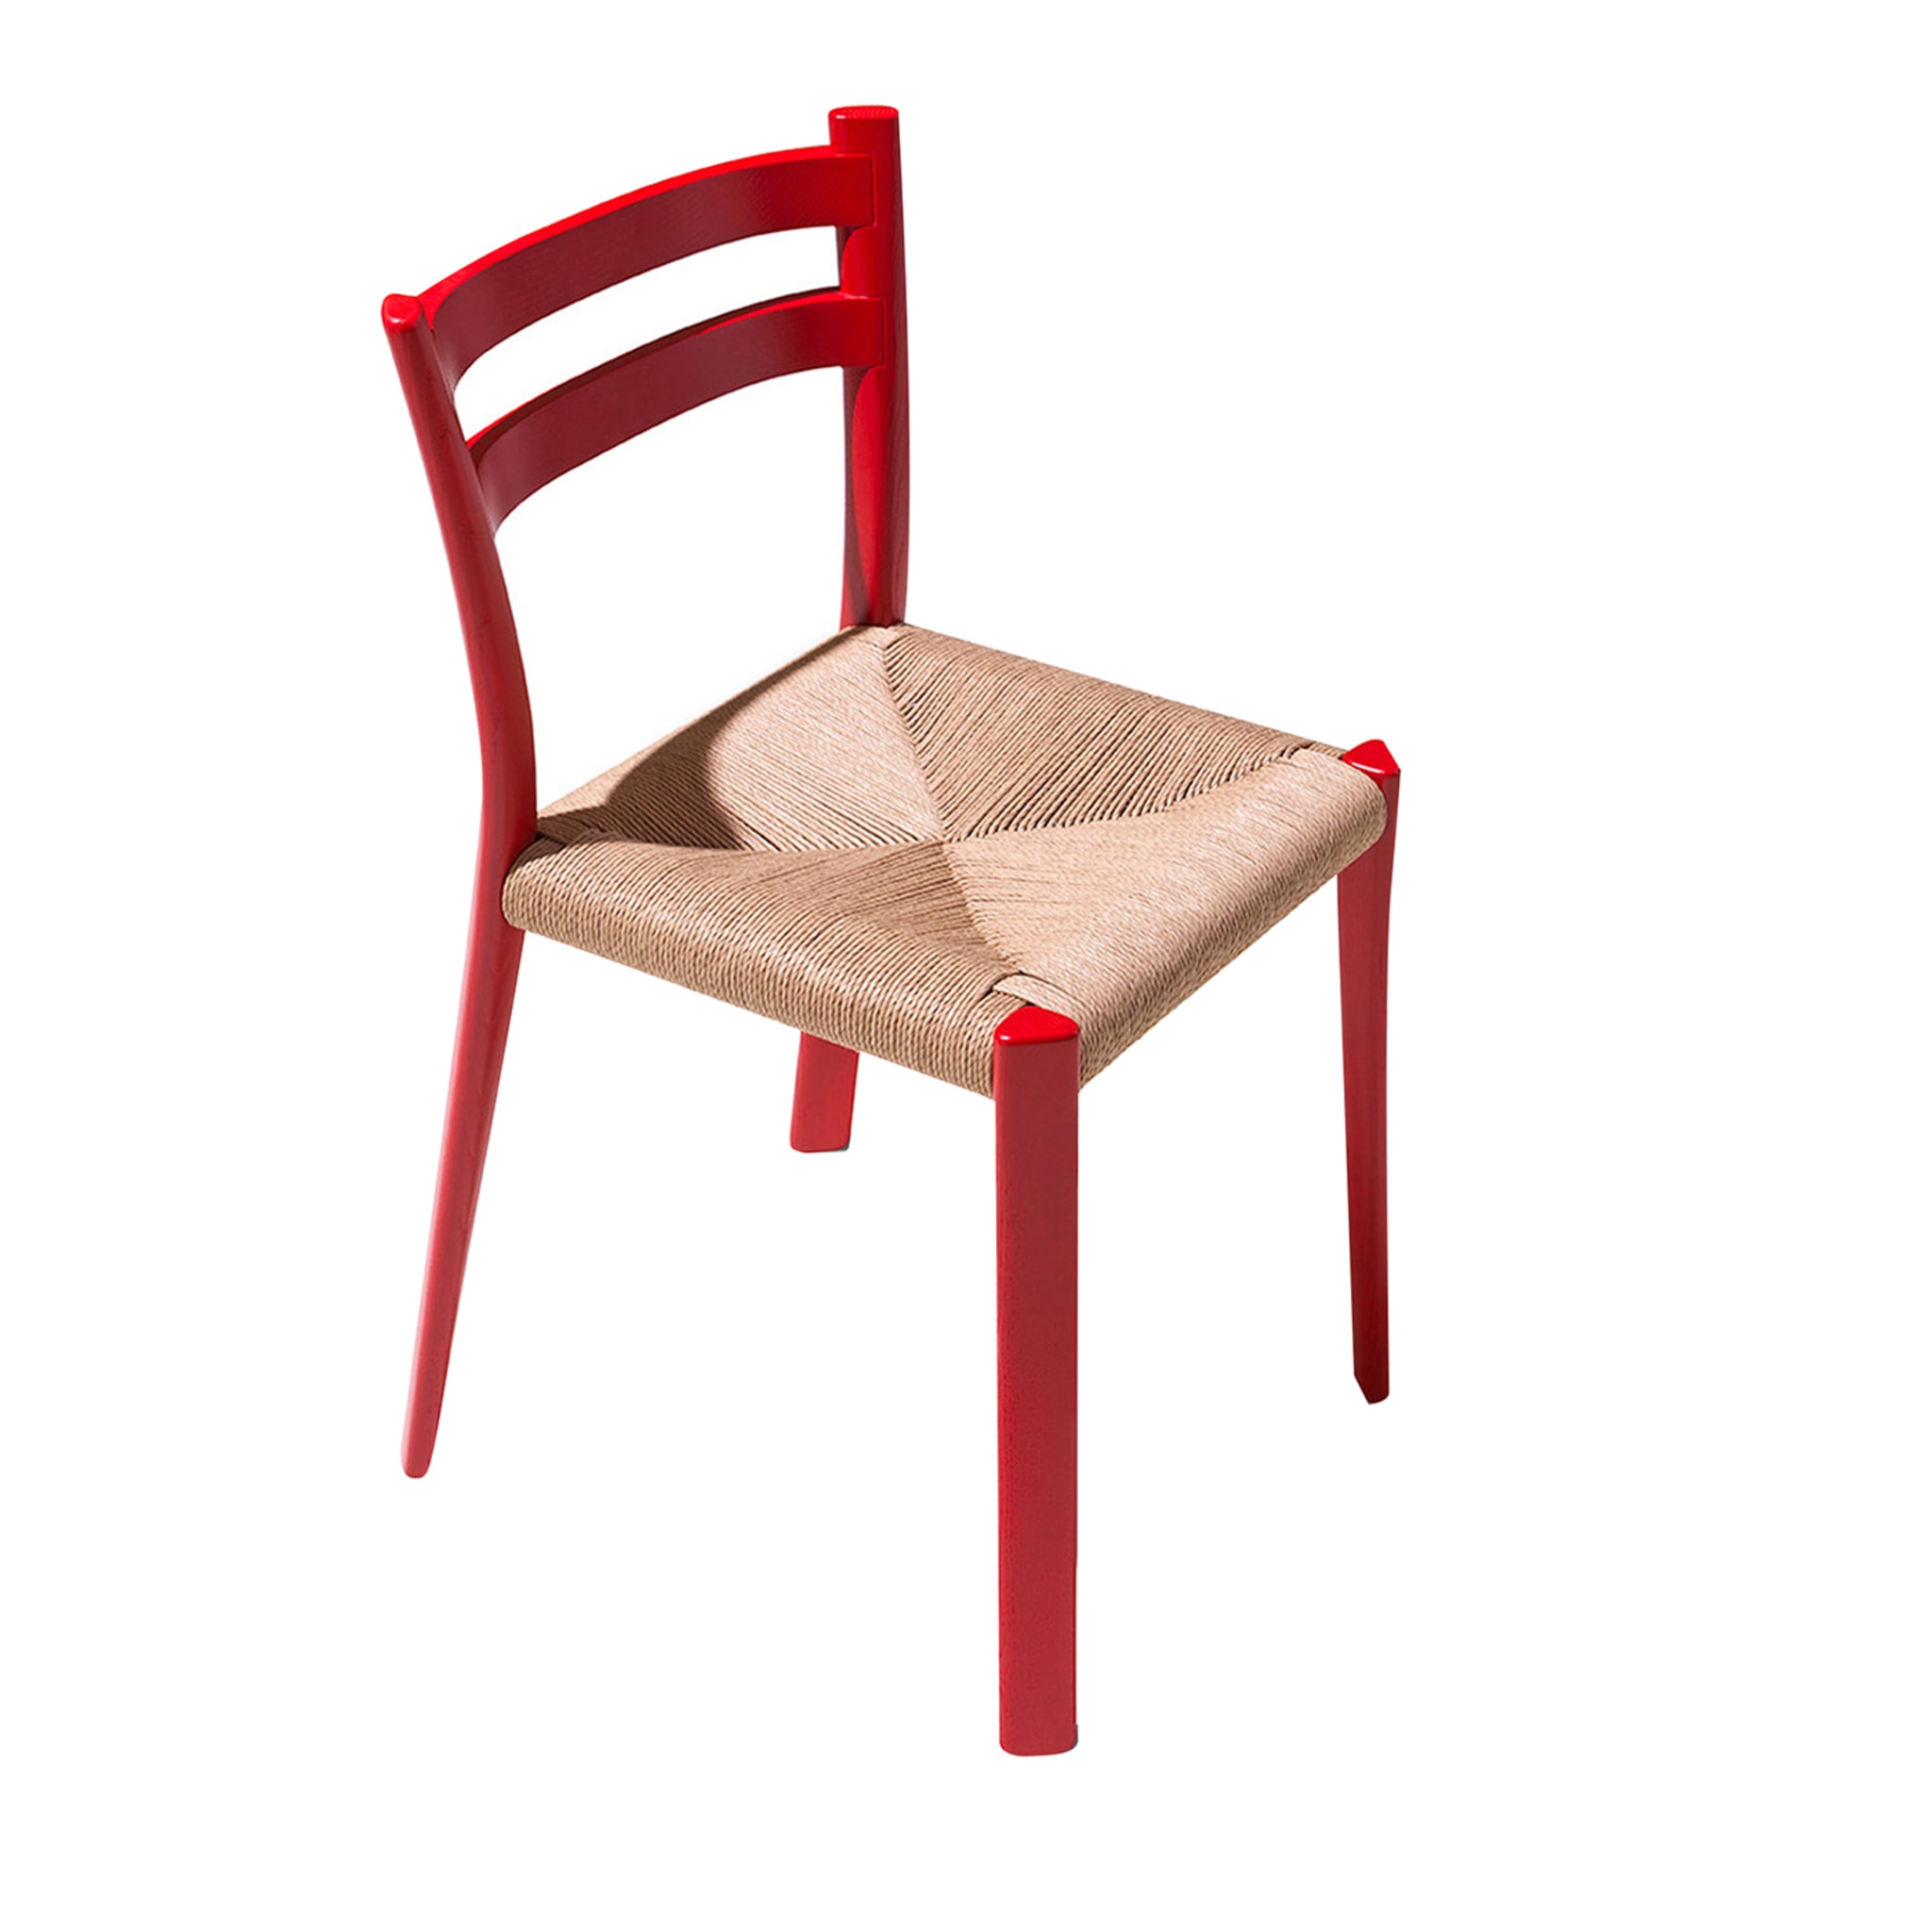 Buri Red Chair by Mario Scairato - Main view